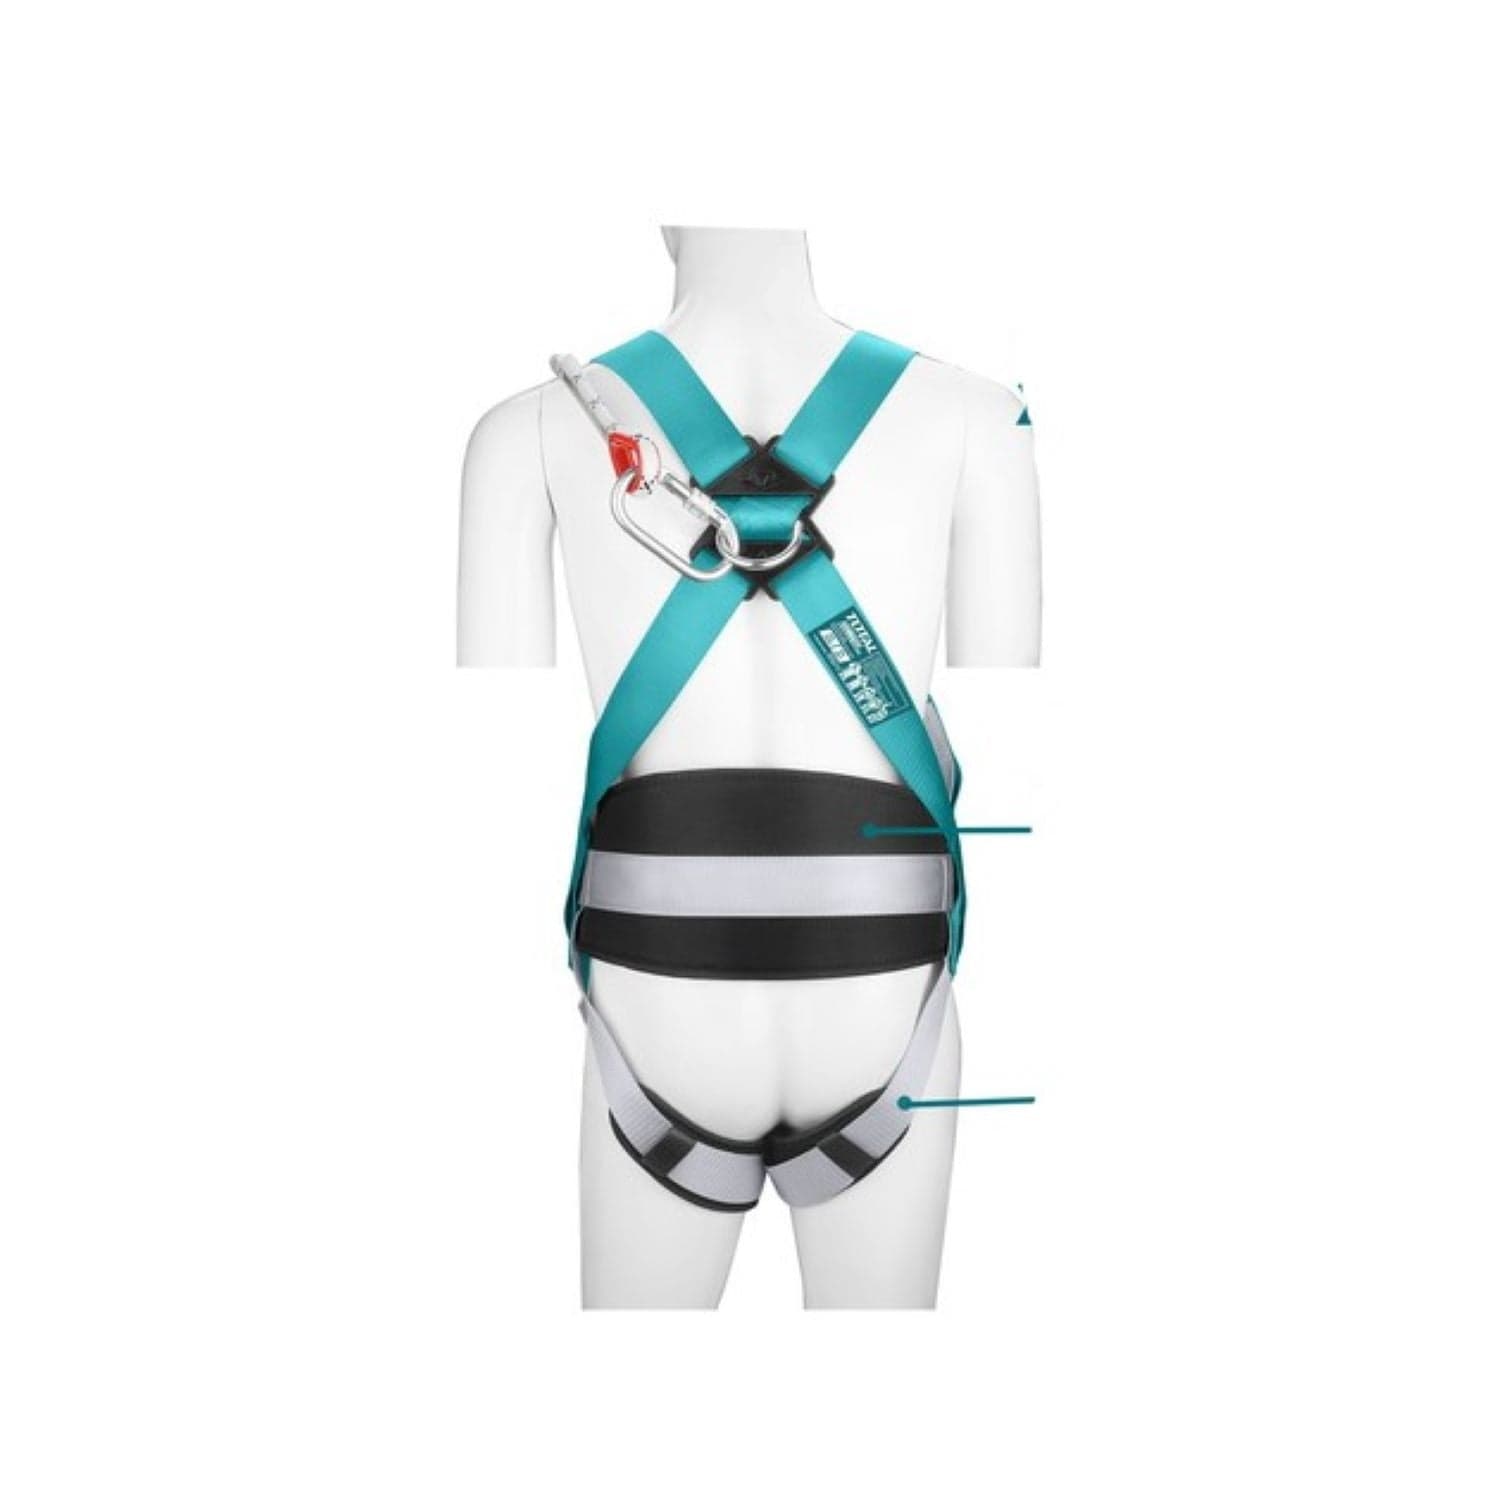 Total Safety Harness Belt - THSH501806: Protection and Security for Work in Accra, Ghana | Supply Master Specialty Safety Equipment Buy Tools hardware Building materials